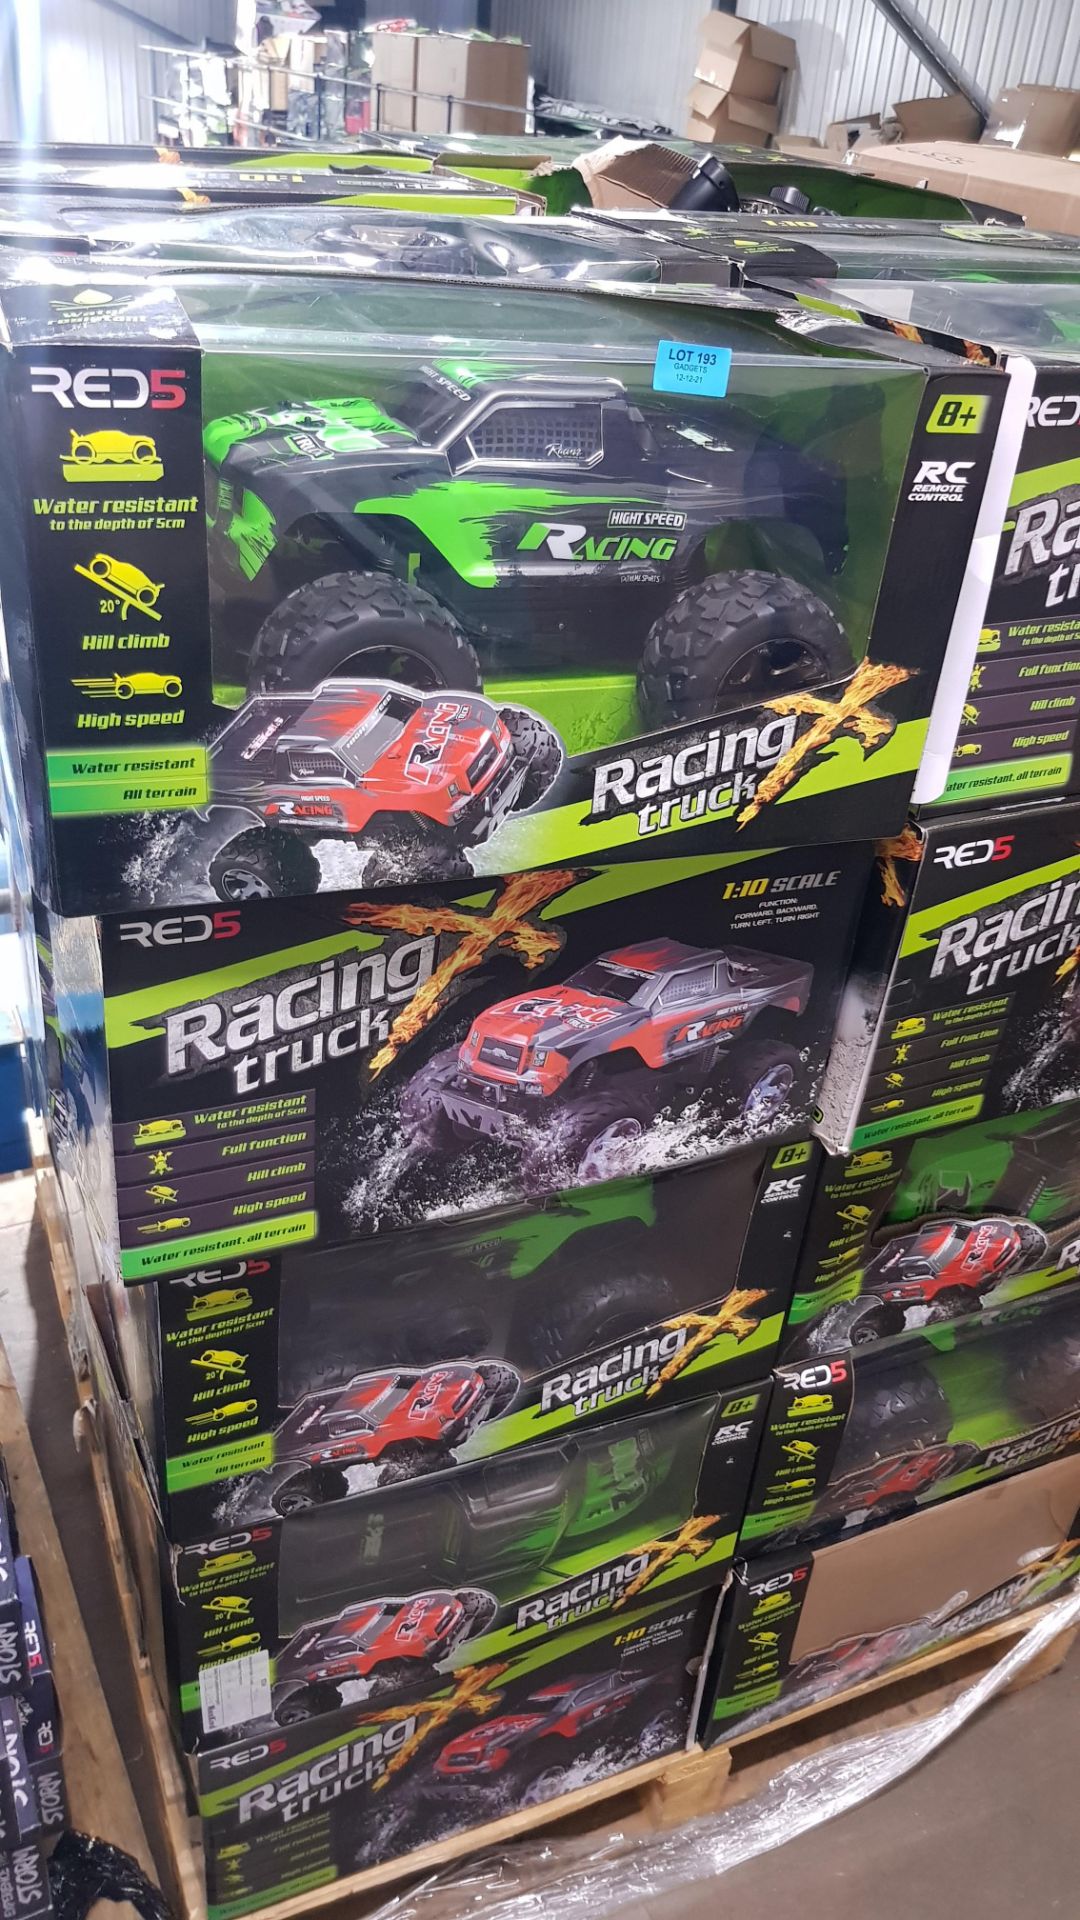 5x Red5 RC Racing Truck 1:10 Scale RRP £70 Each. (Units Have Return To Manufacturer Sticker). - Image 3 of 3